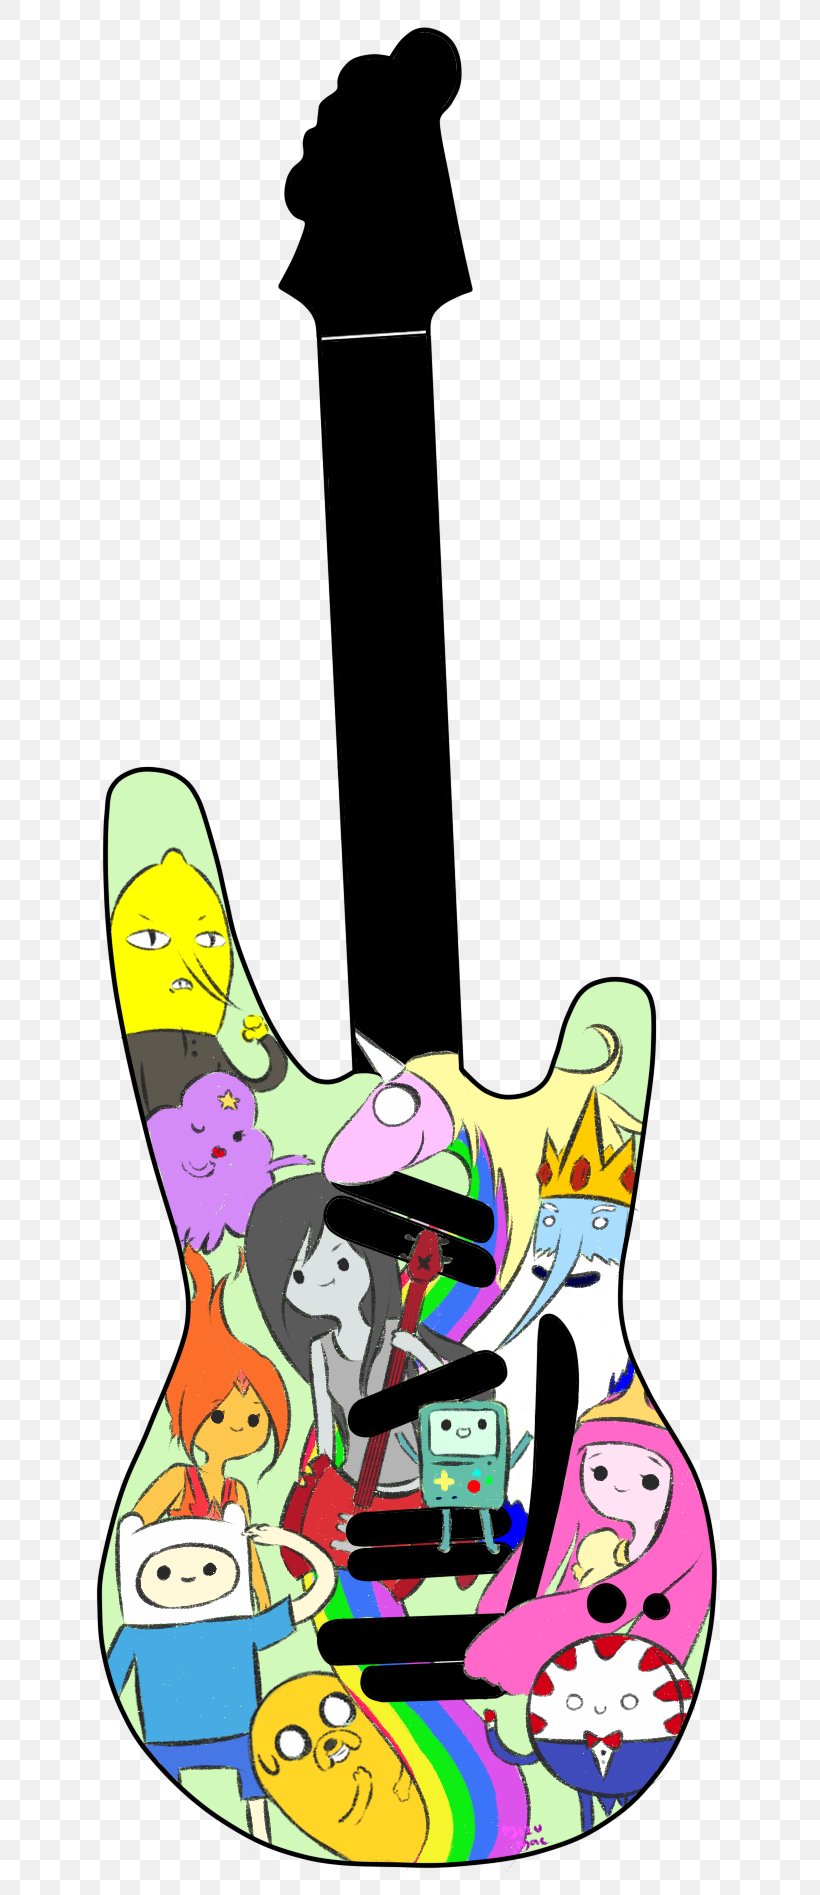 Flame Princess Marceline The Vampire Queen Drawing Clip Art, PNG, 705x1895px, Flame Princess, Adventure Time, Art, Artwork, Cartoon Download Free